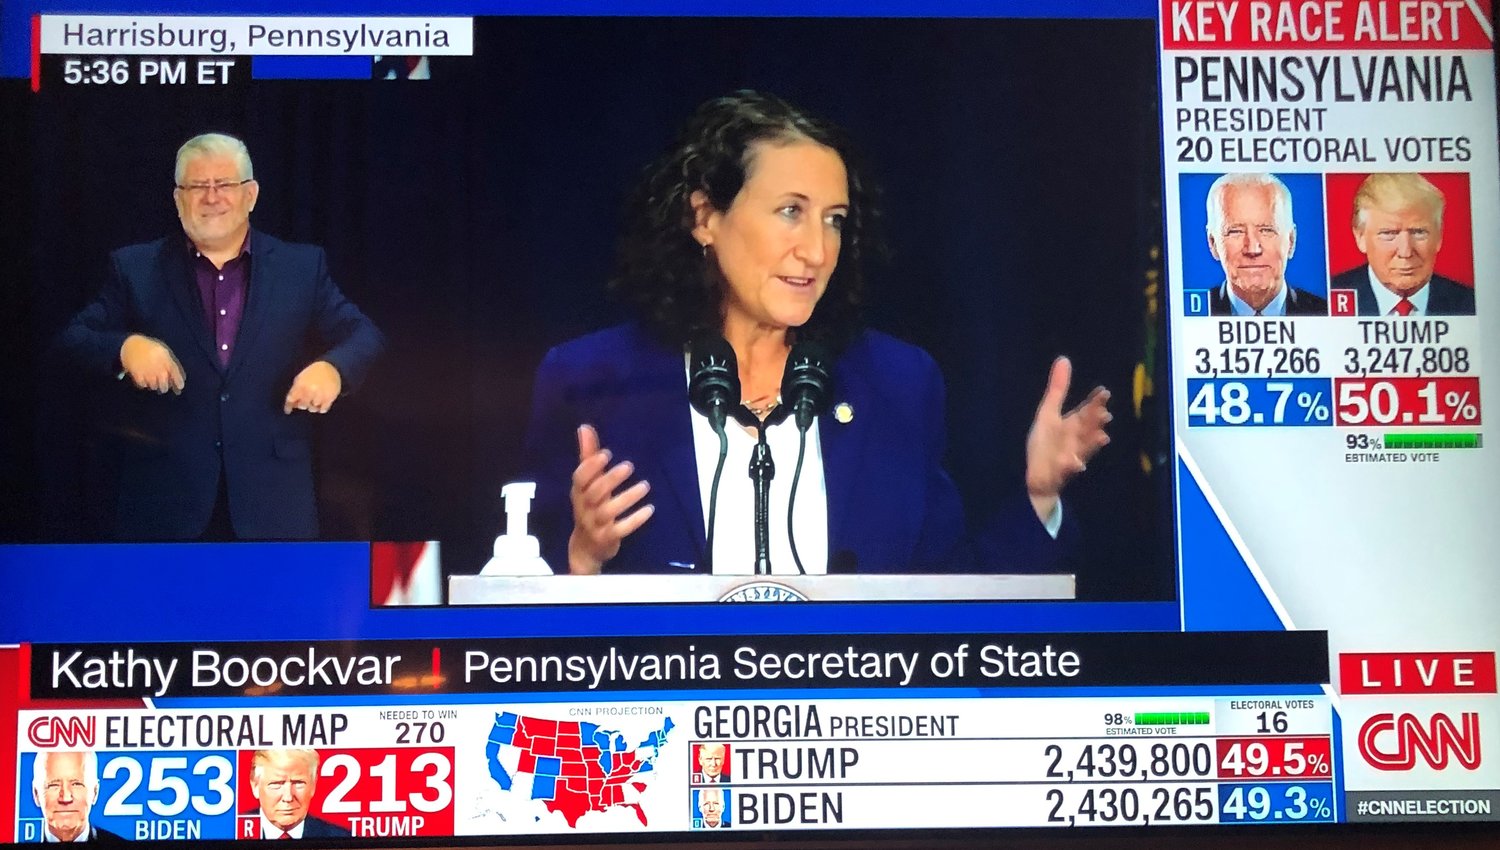 Five Towns native Kathy Boockvar in her position as the Secretary of State of Pennsylvania explained the ballot counting process that is being conducted under her watch.